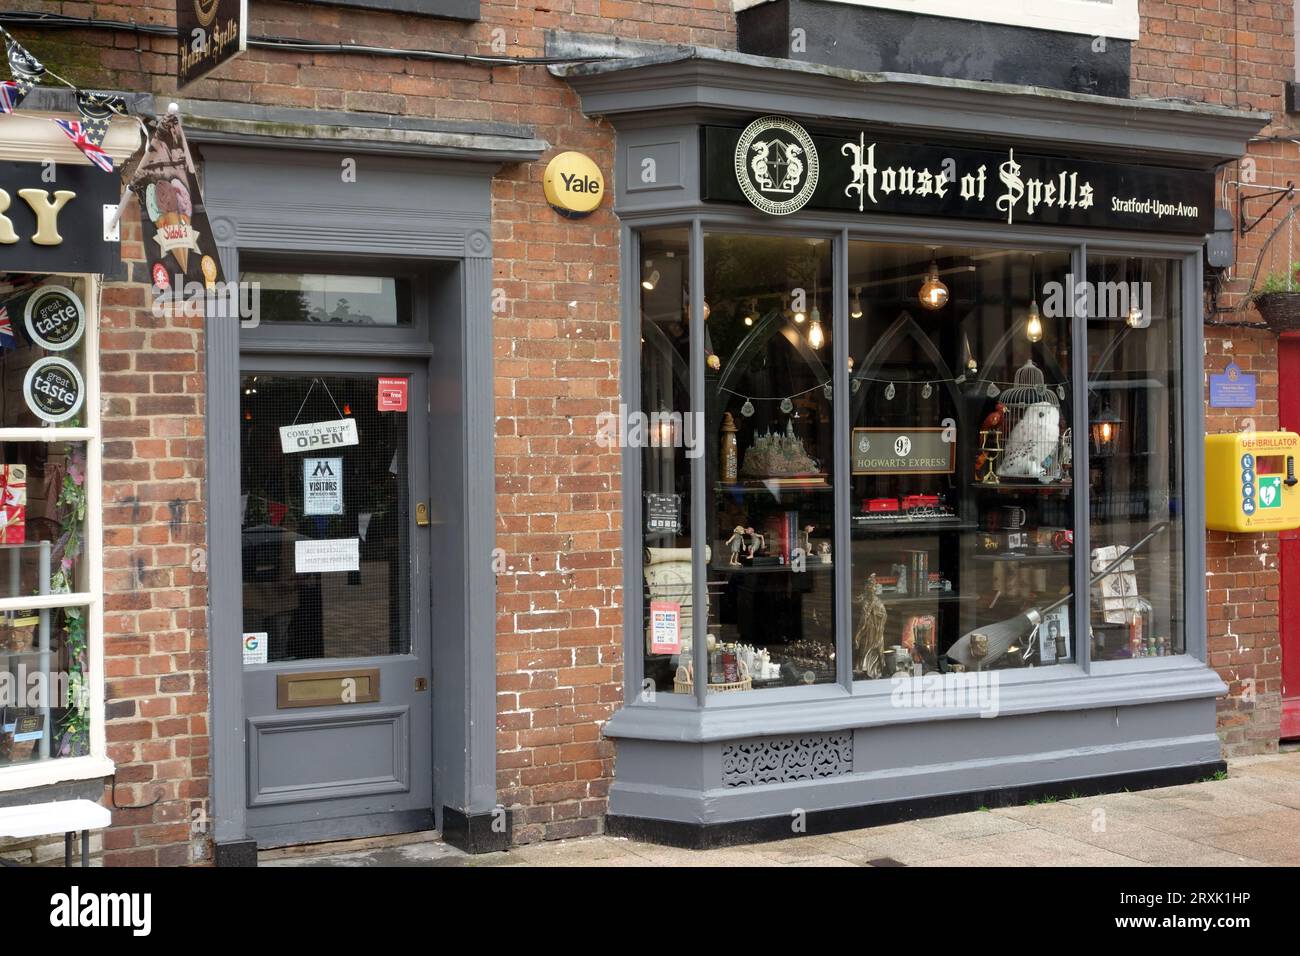 House of Spells Shop Front specializzato in cimeli di Harry Potter in Henley Street, Stratford-upon-Avon, Warwickshire, West Midlands, Inghilterra, REGNO UNITO. Foto Stock